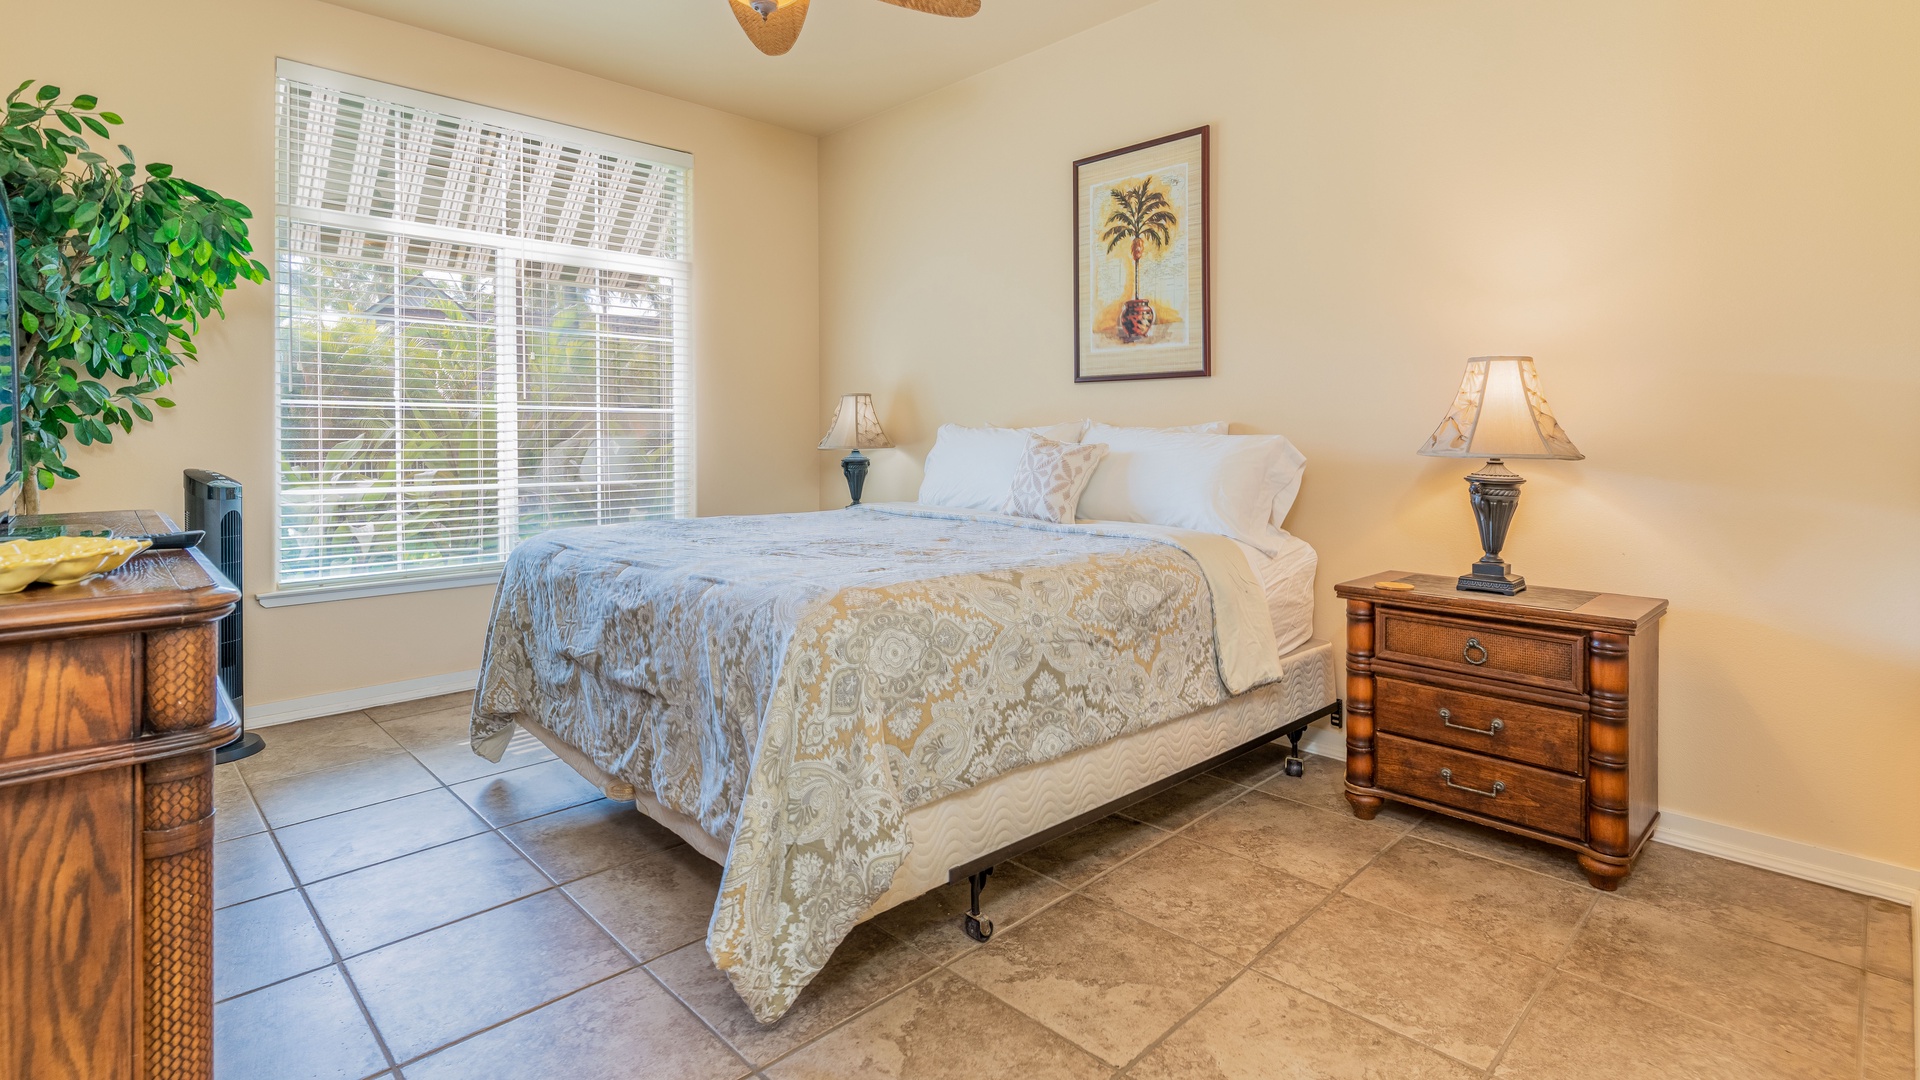 Kapolei Vacation Rentals, Kai Lani 8B - The primary guest bedroom is comfortable and spacious for a restful slumber.